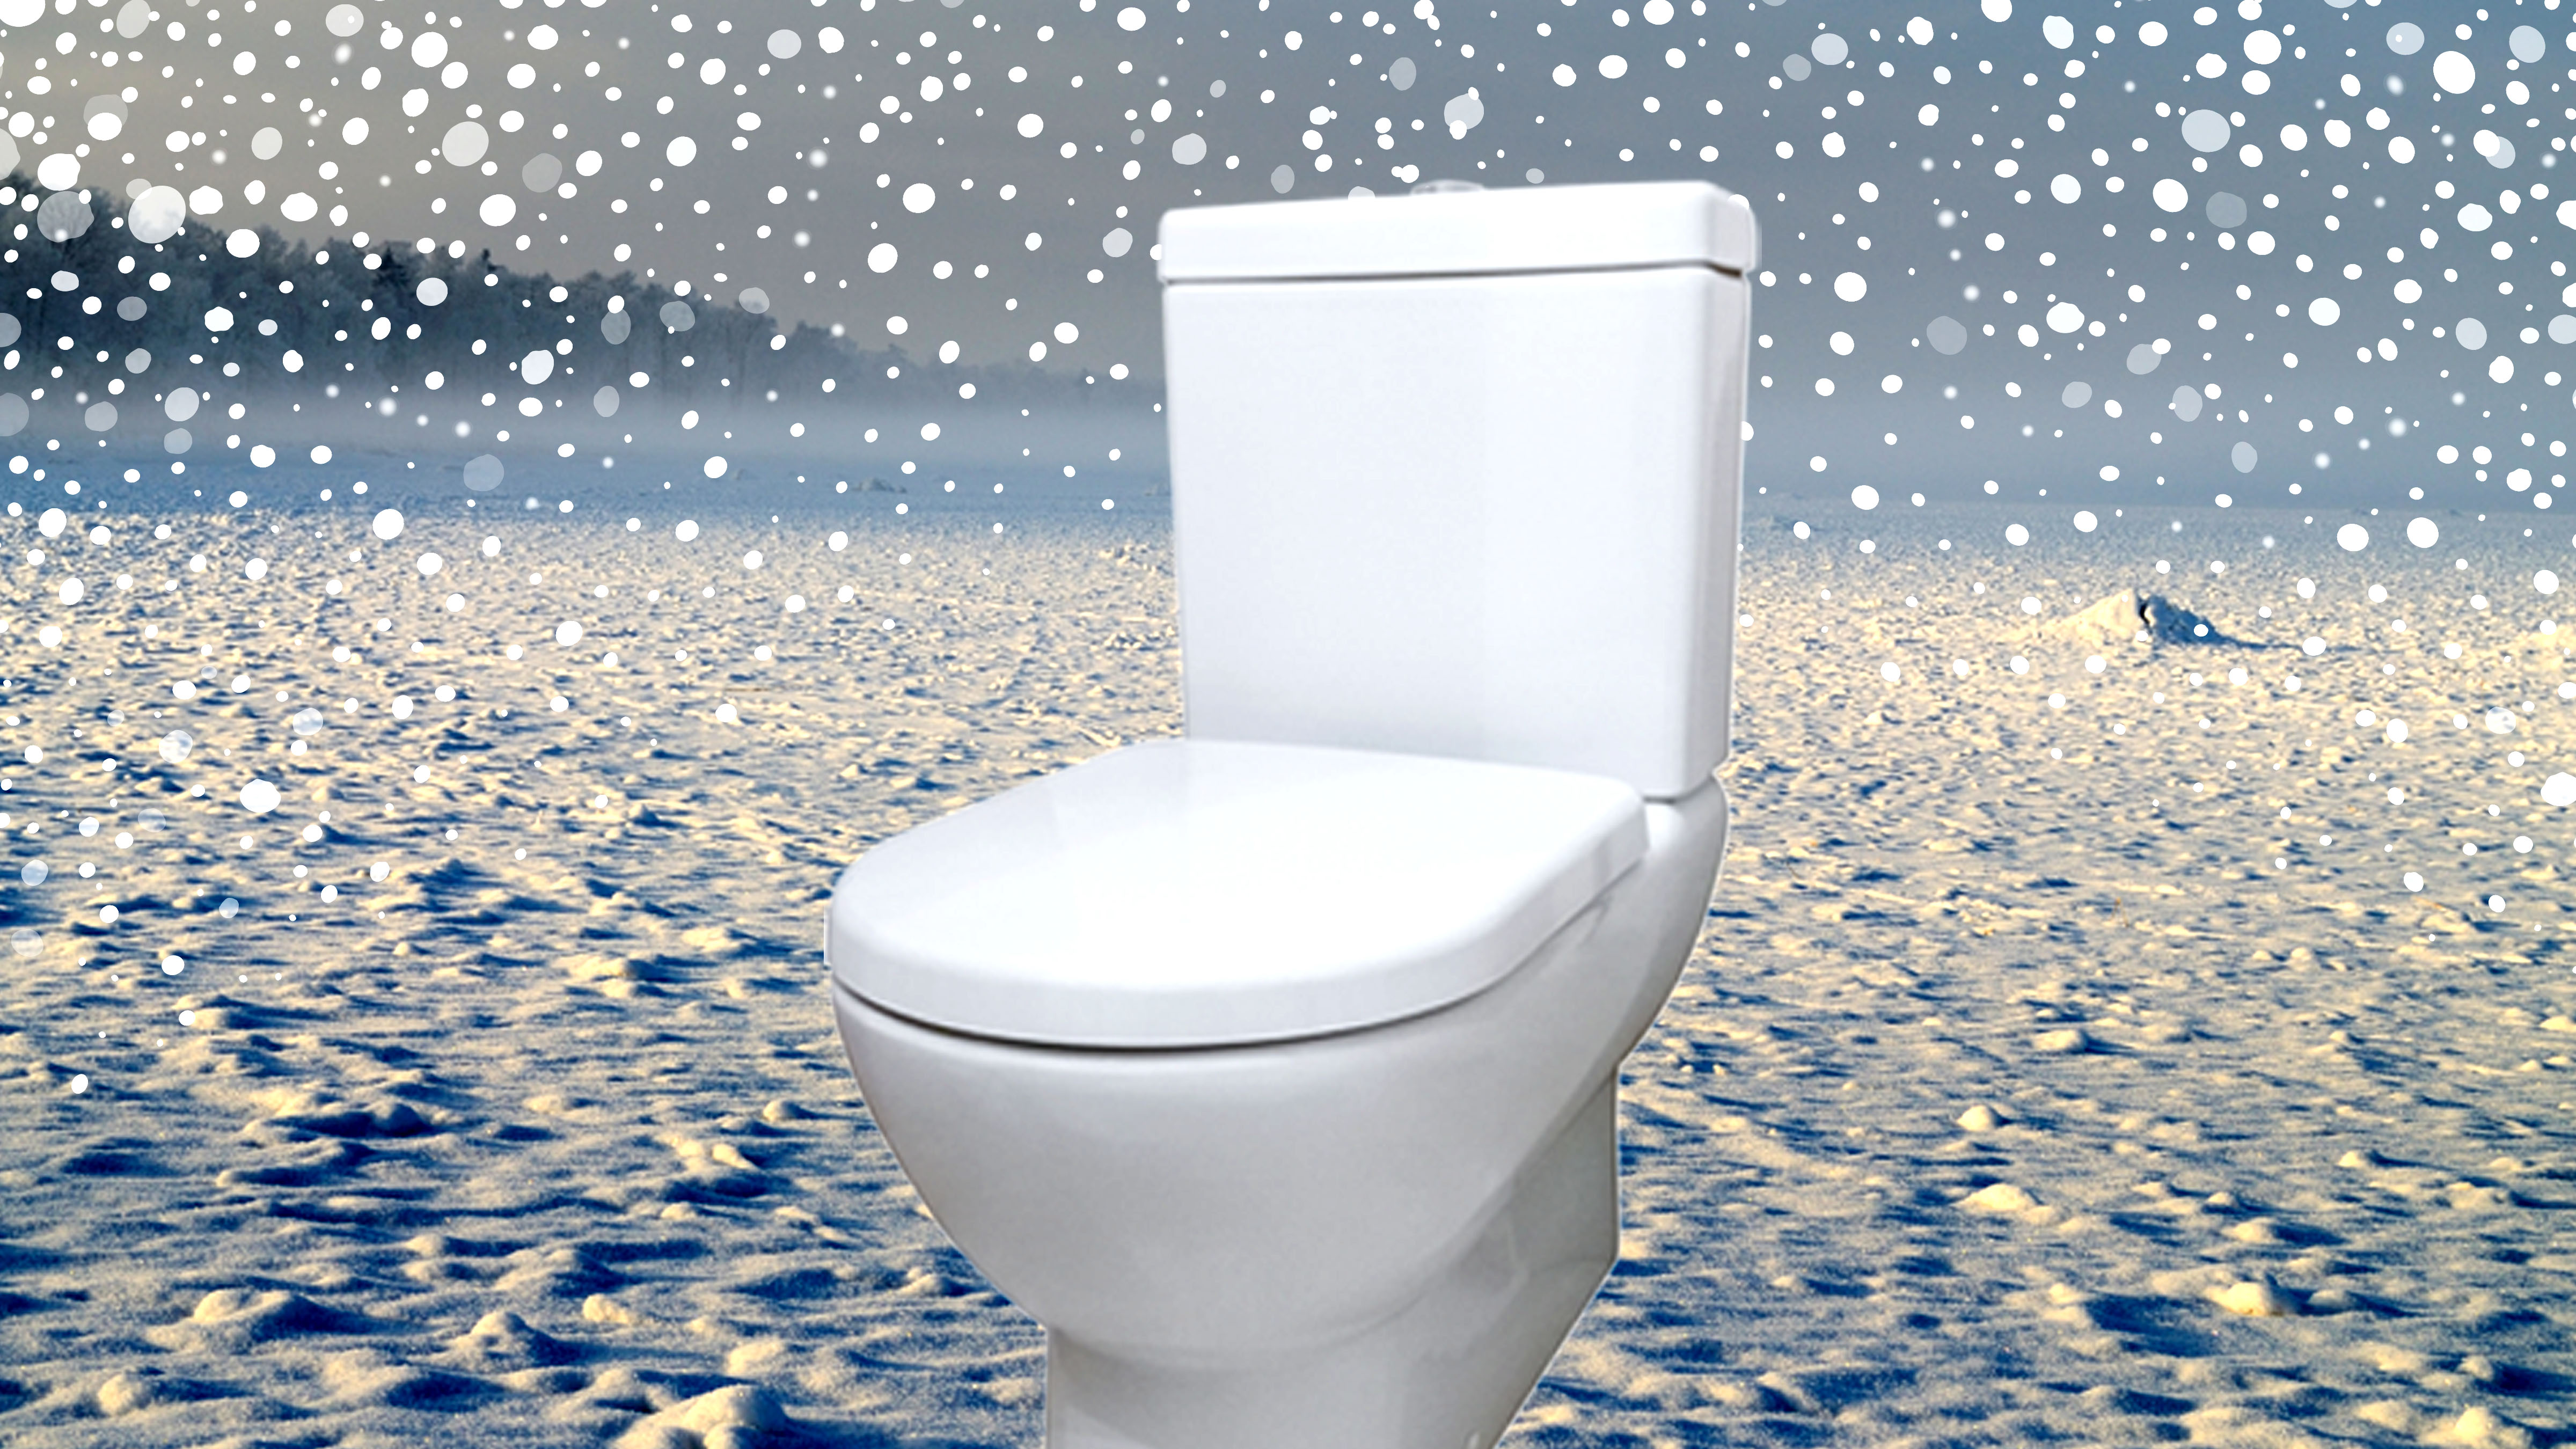 How to Warm up a Freezing Cold Toilet Seat - Dollar Shave Club Original  Content